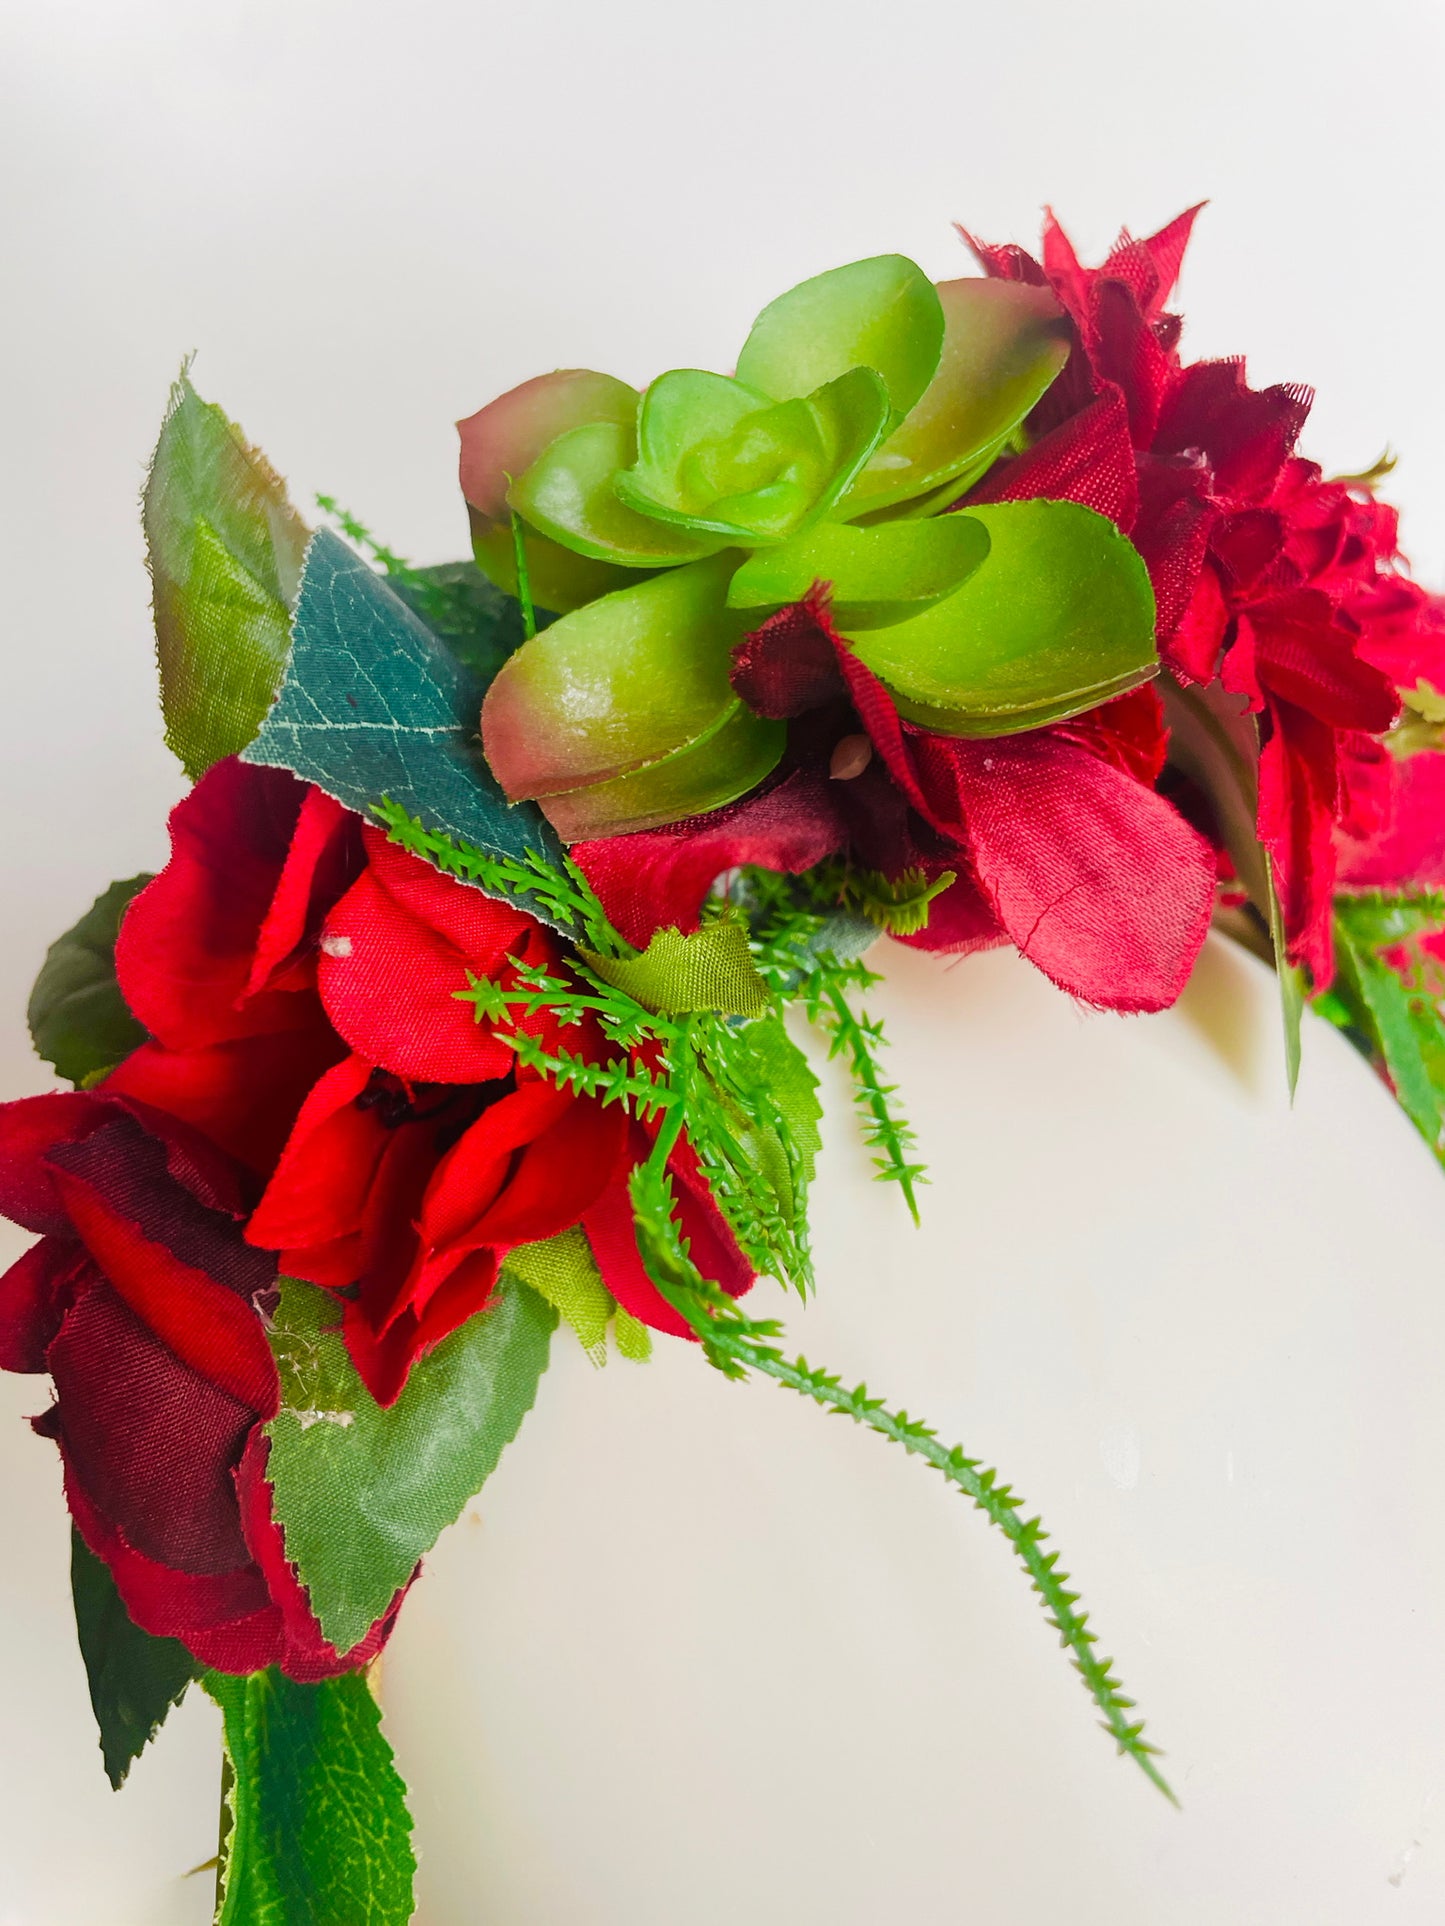 Las Ofrendas One of a Kind Red and Green Frida Kahlo Inspired Flower Crown Headpiece - Las Ofrendas 